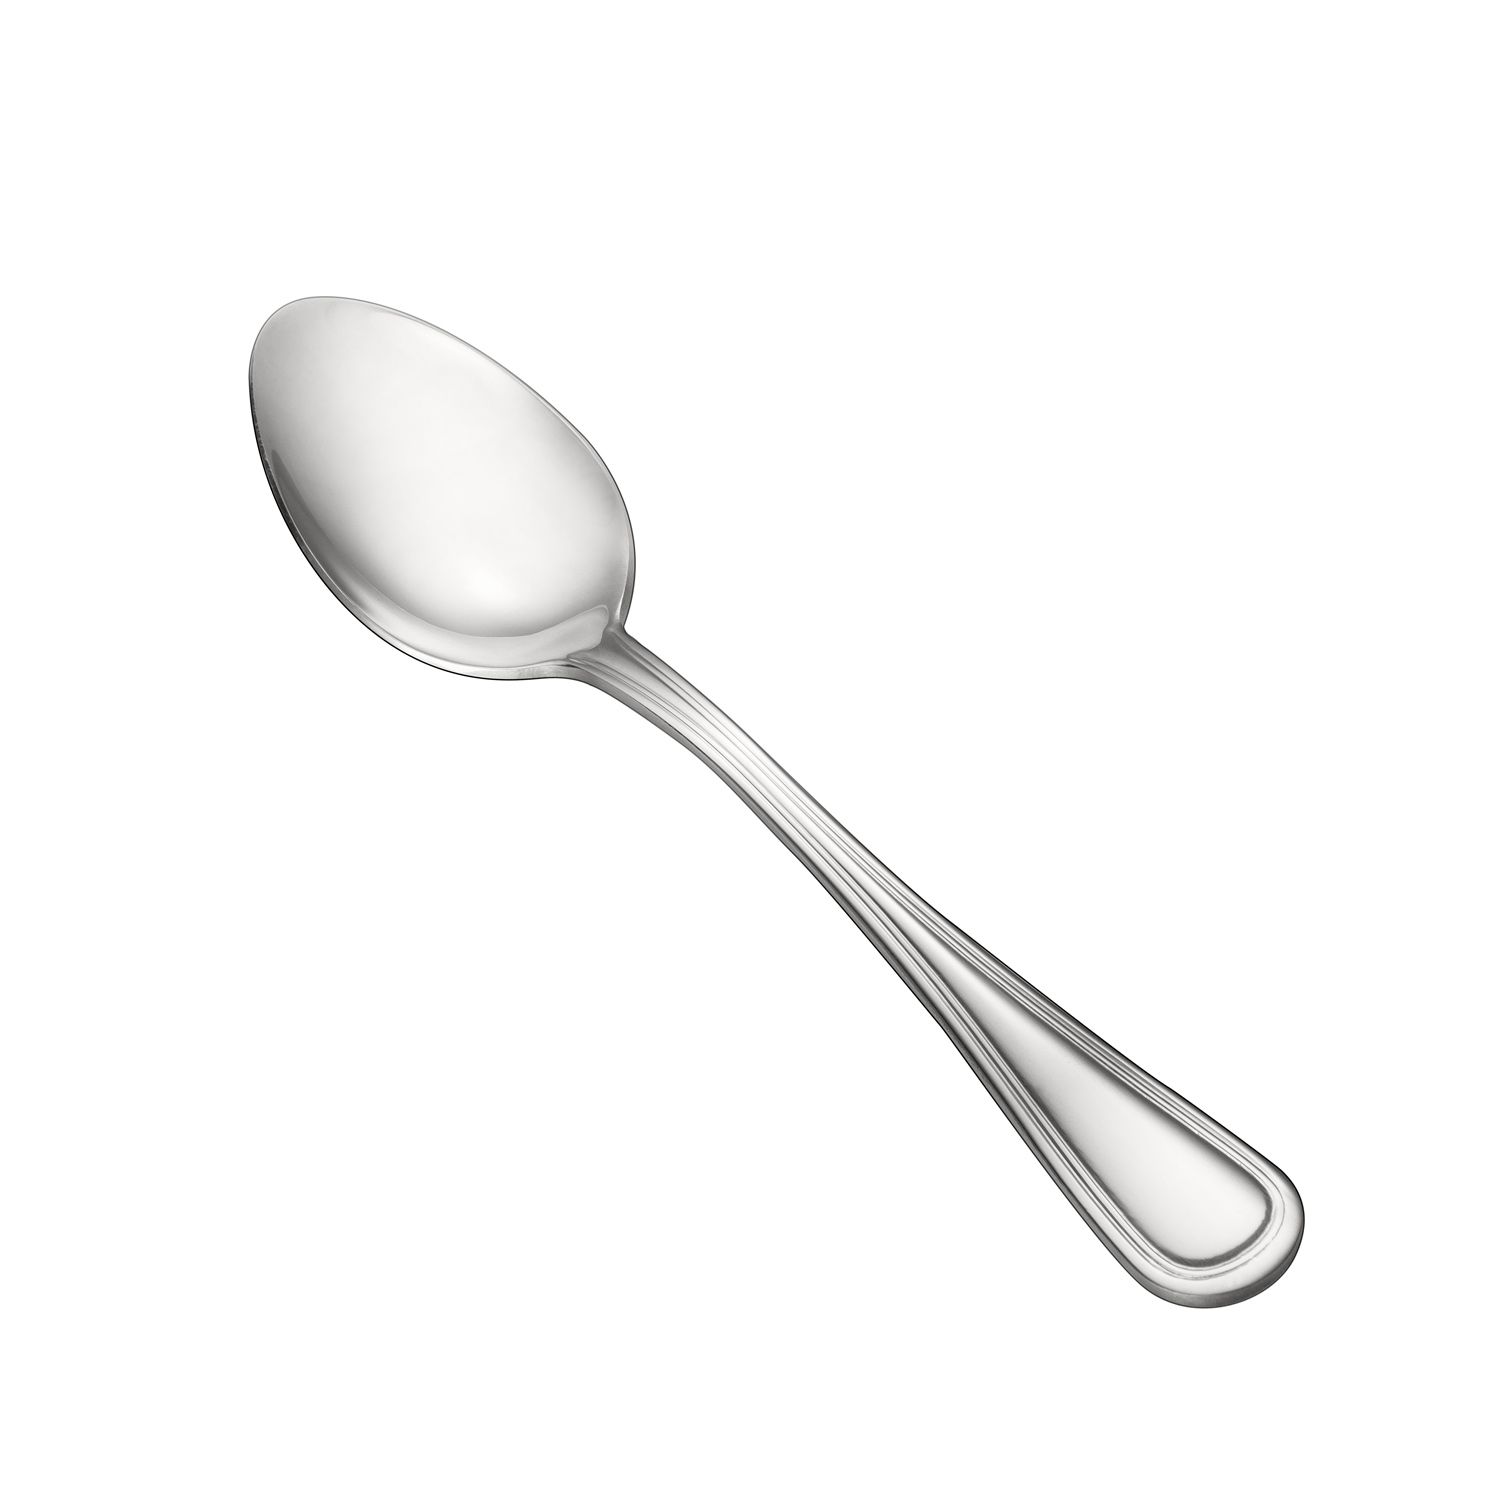 CAC China 3002-03 Prime Dinner Spoon, Extra Heavyweight 18/0, 7 1/4"